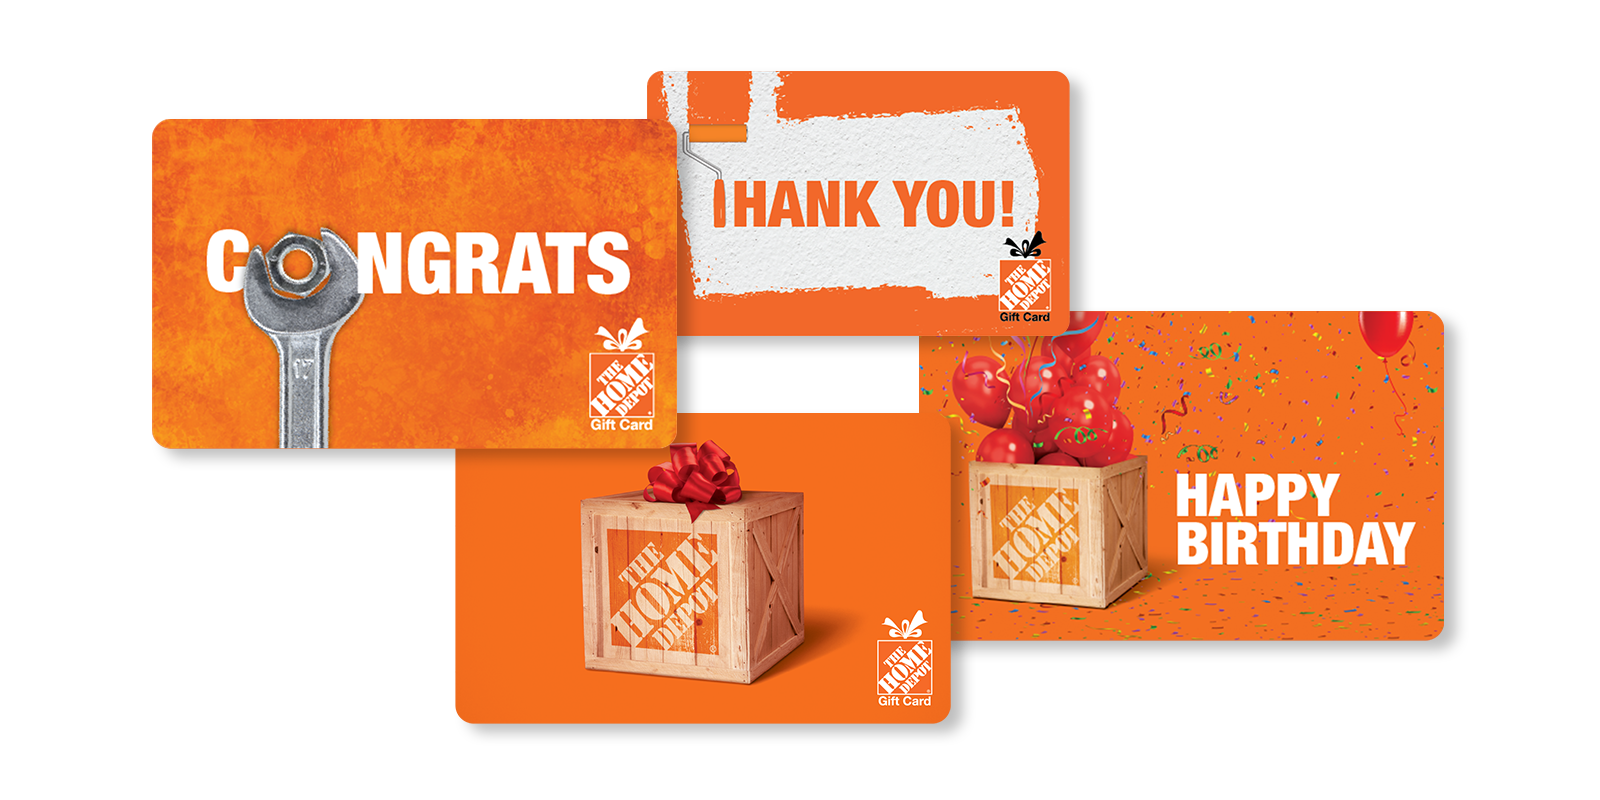 The Home Depot Corporate Gift Card Options